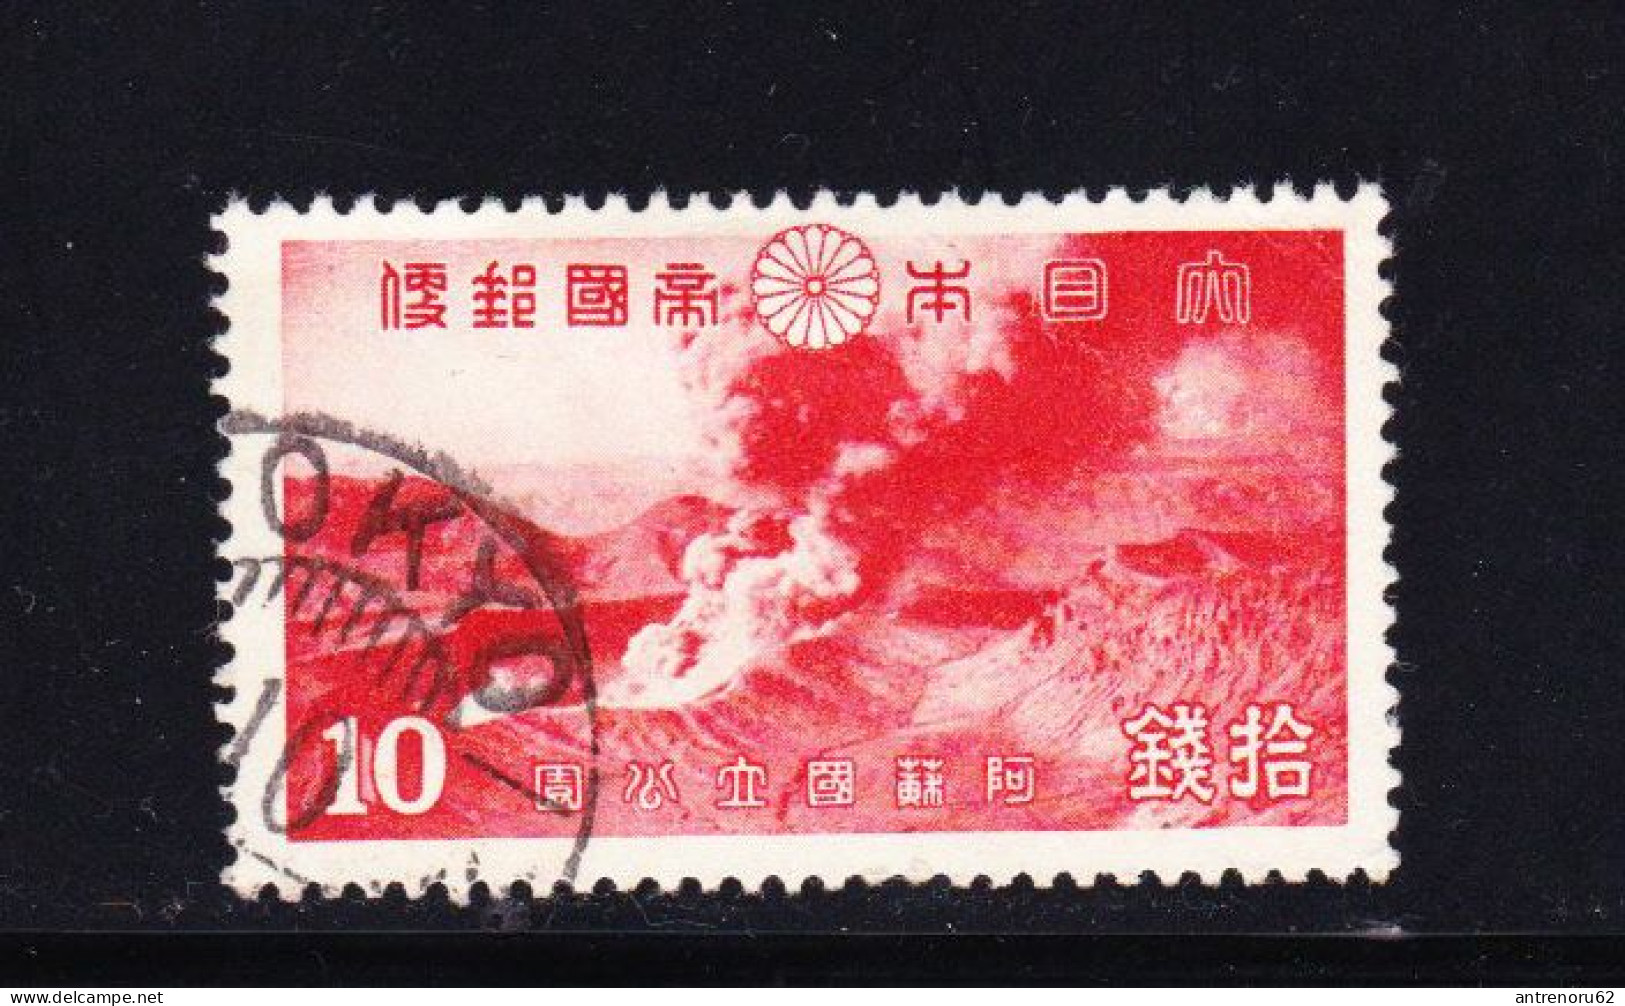 STAMPS-JAPAN-1939-USED-SEE-SCAN - Used Stamps